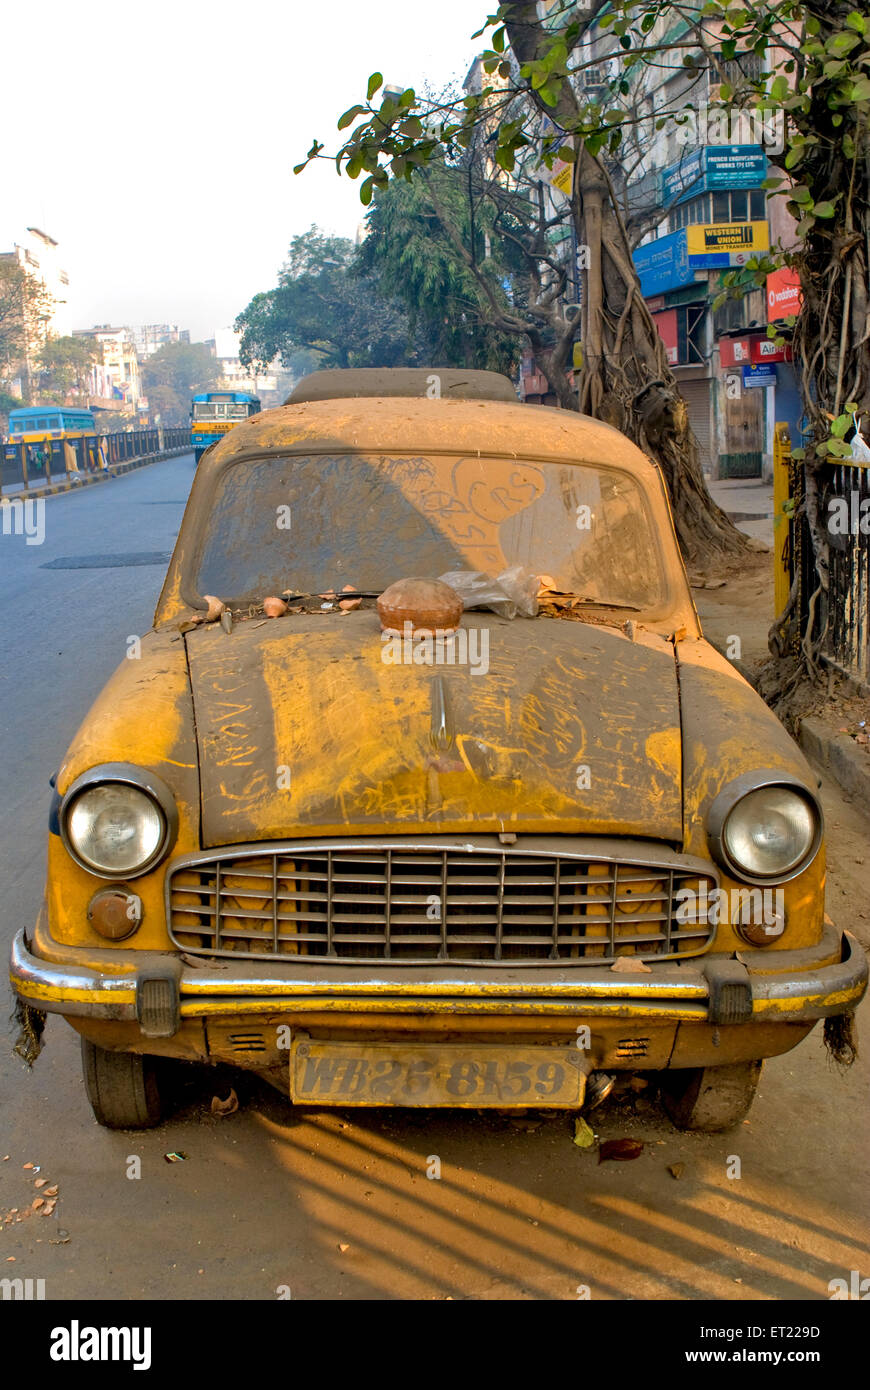 Old unused discarded covered with dust taxi Bhowanipur Calcutta Kolkata West Bengal India Stock Photo